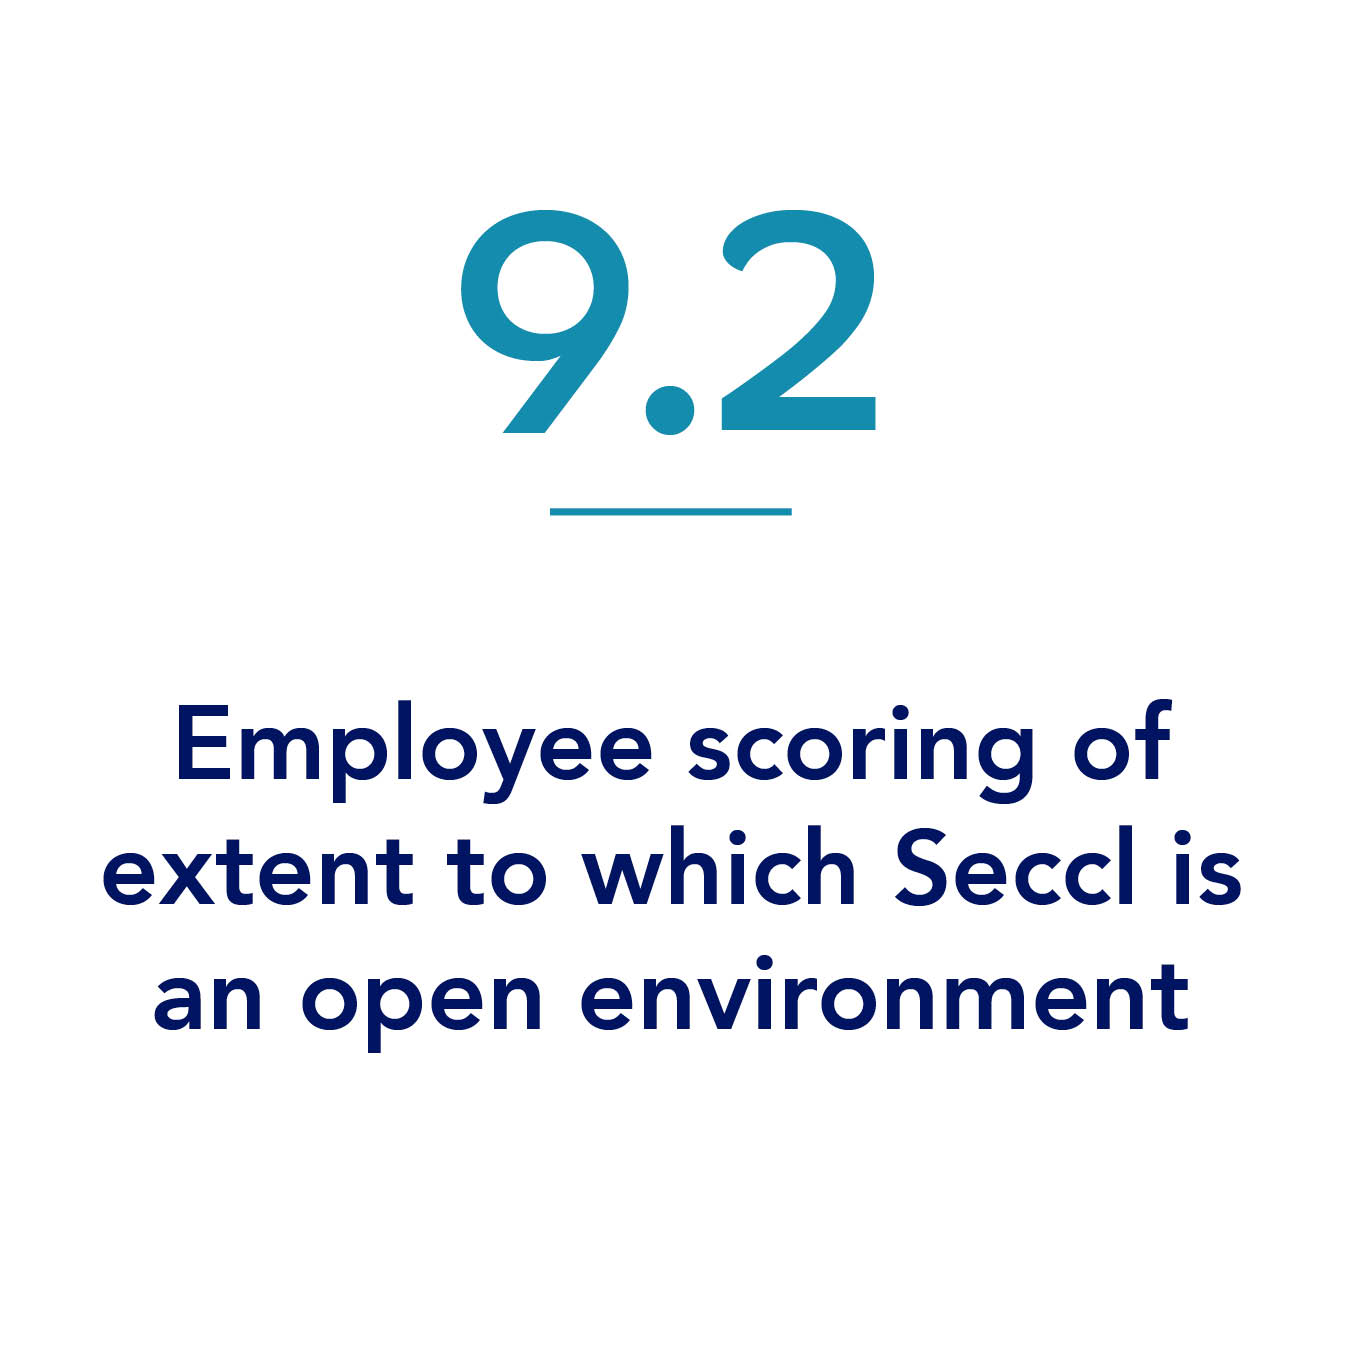 9.2 employee scoring of extent to which Seccl is an open environment